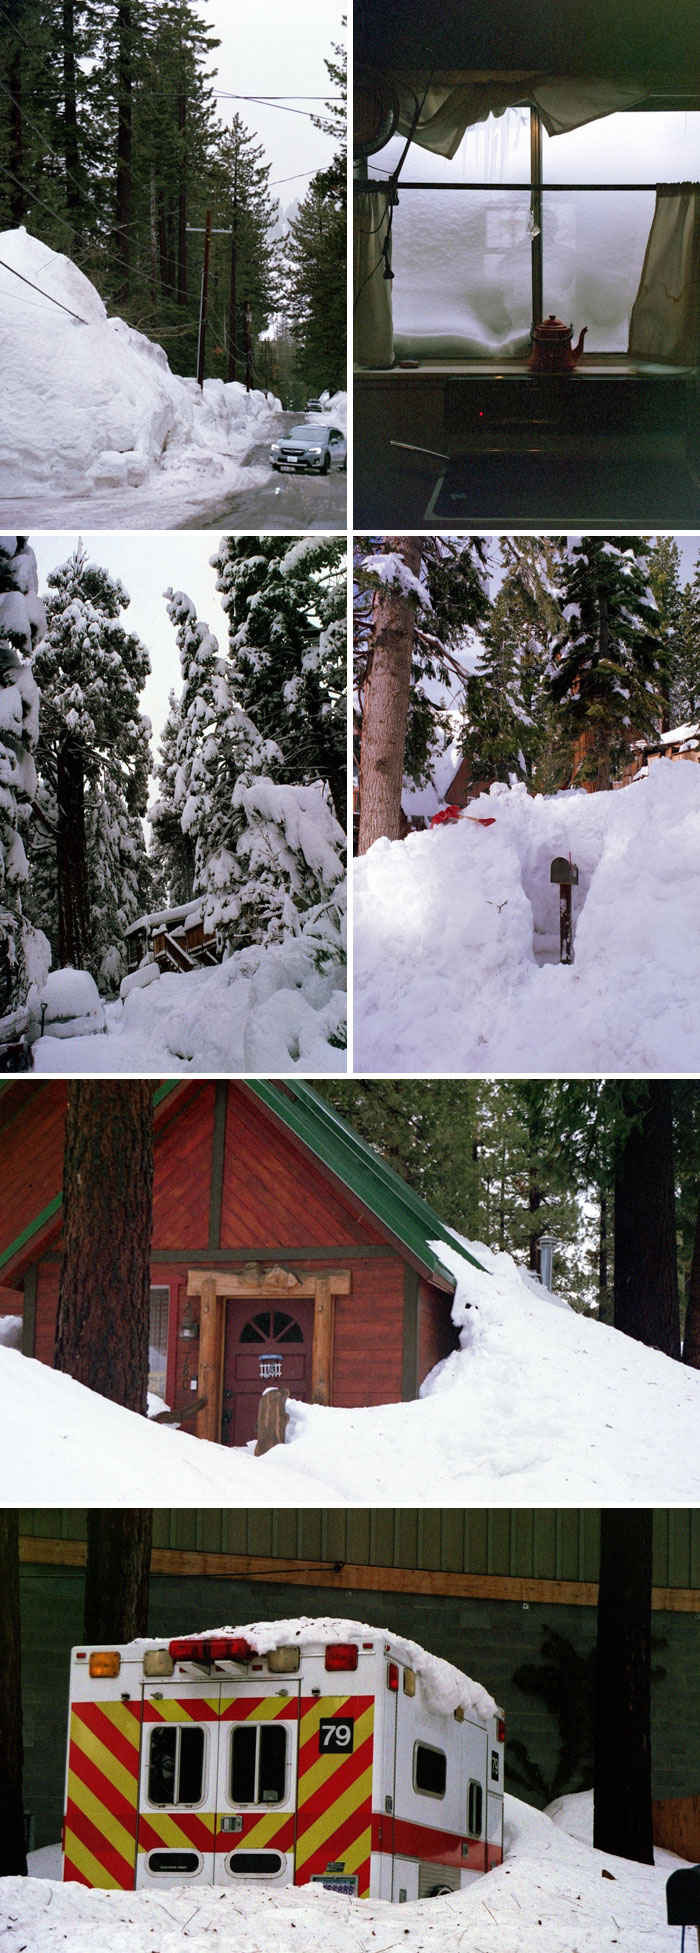 Snow Accumulation In South Lake Tahoe Last Winter